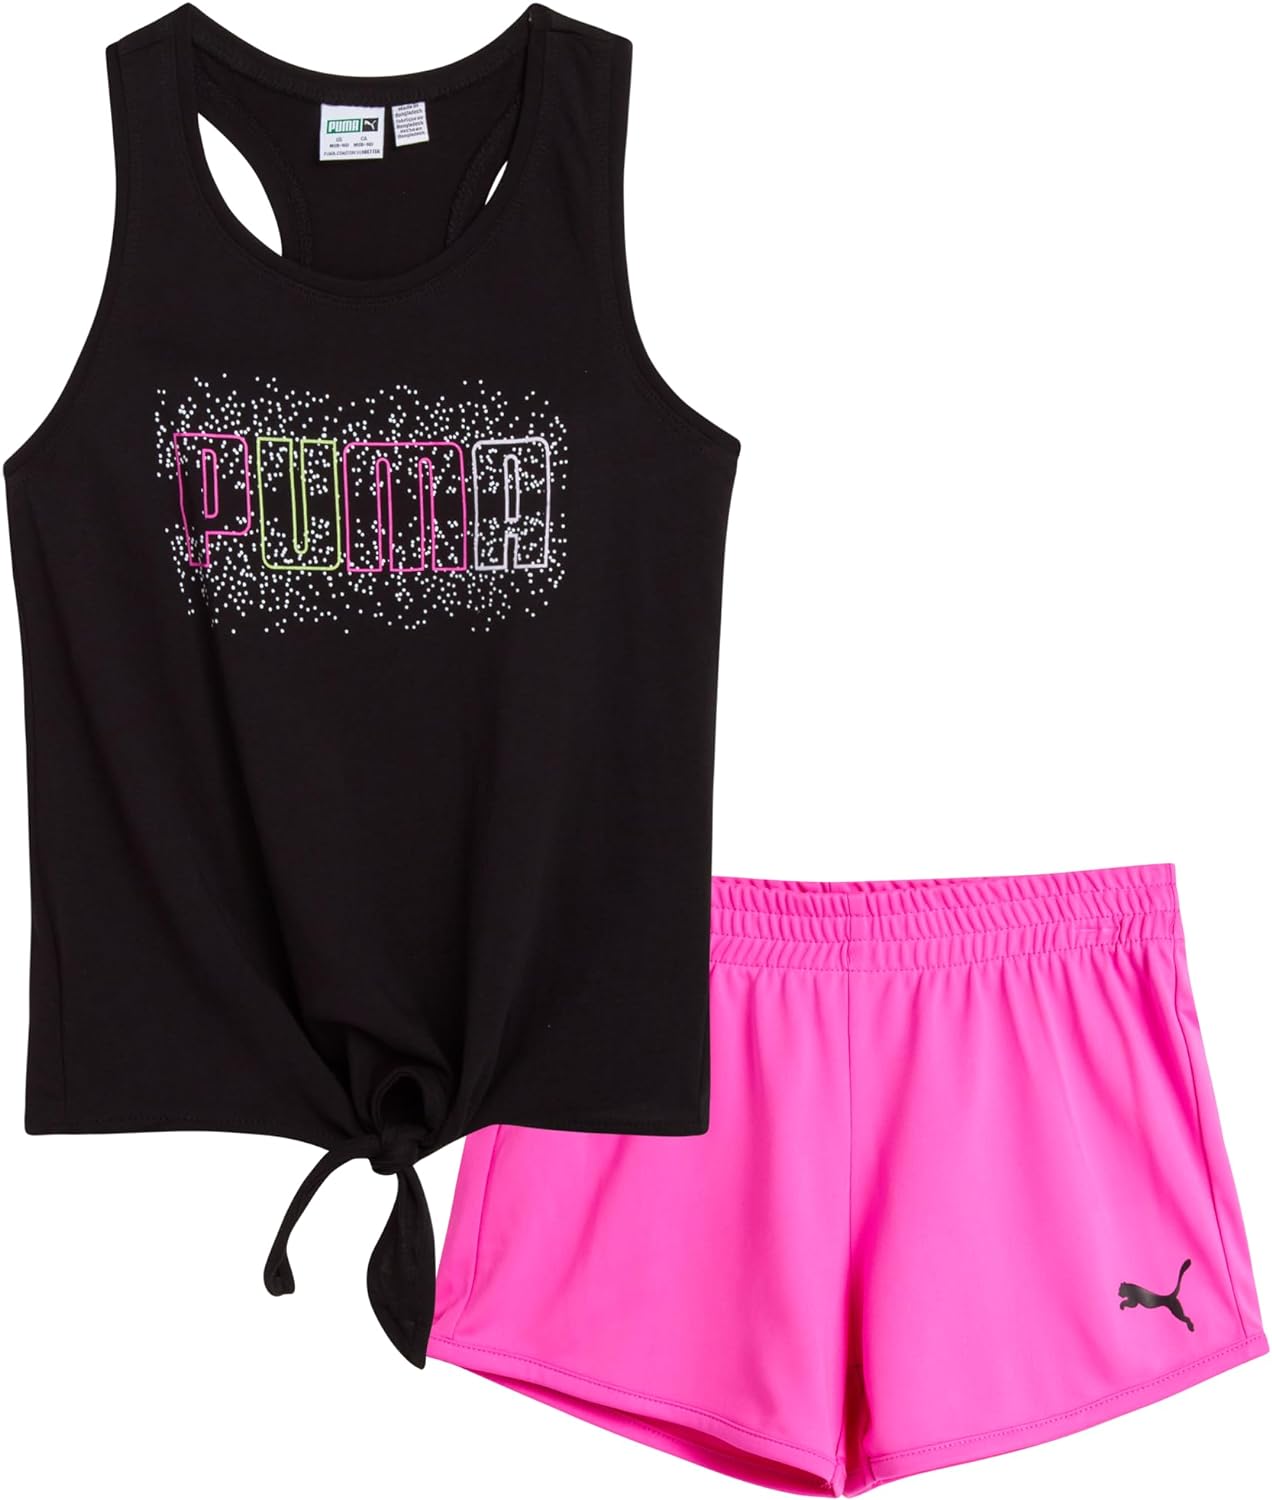 PUMA Girls’ Active Shorts Set – 2 Piece Performance Tank Top and Gym Shorts – Cute Summer Athletic Outfit for Girls (S-L)